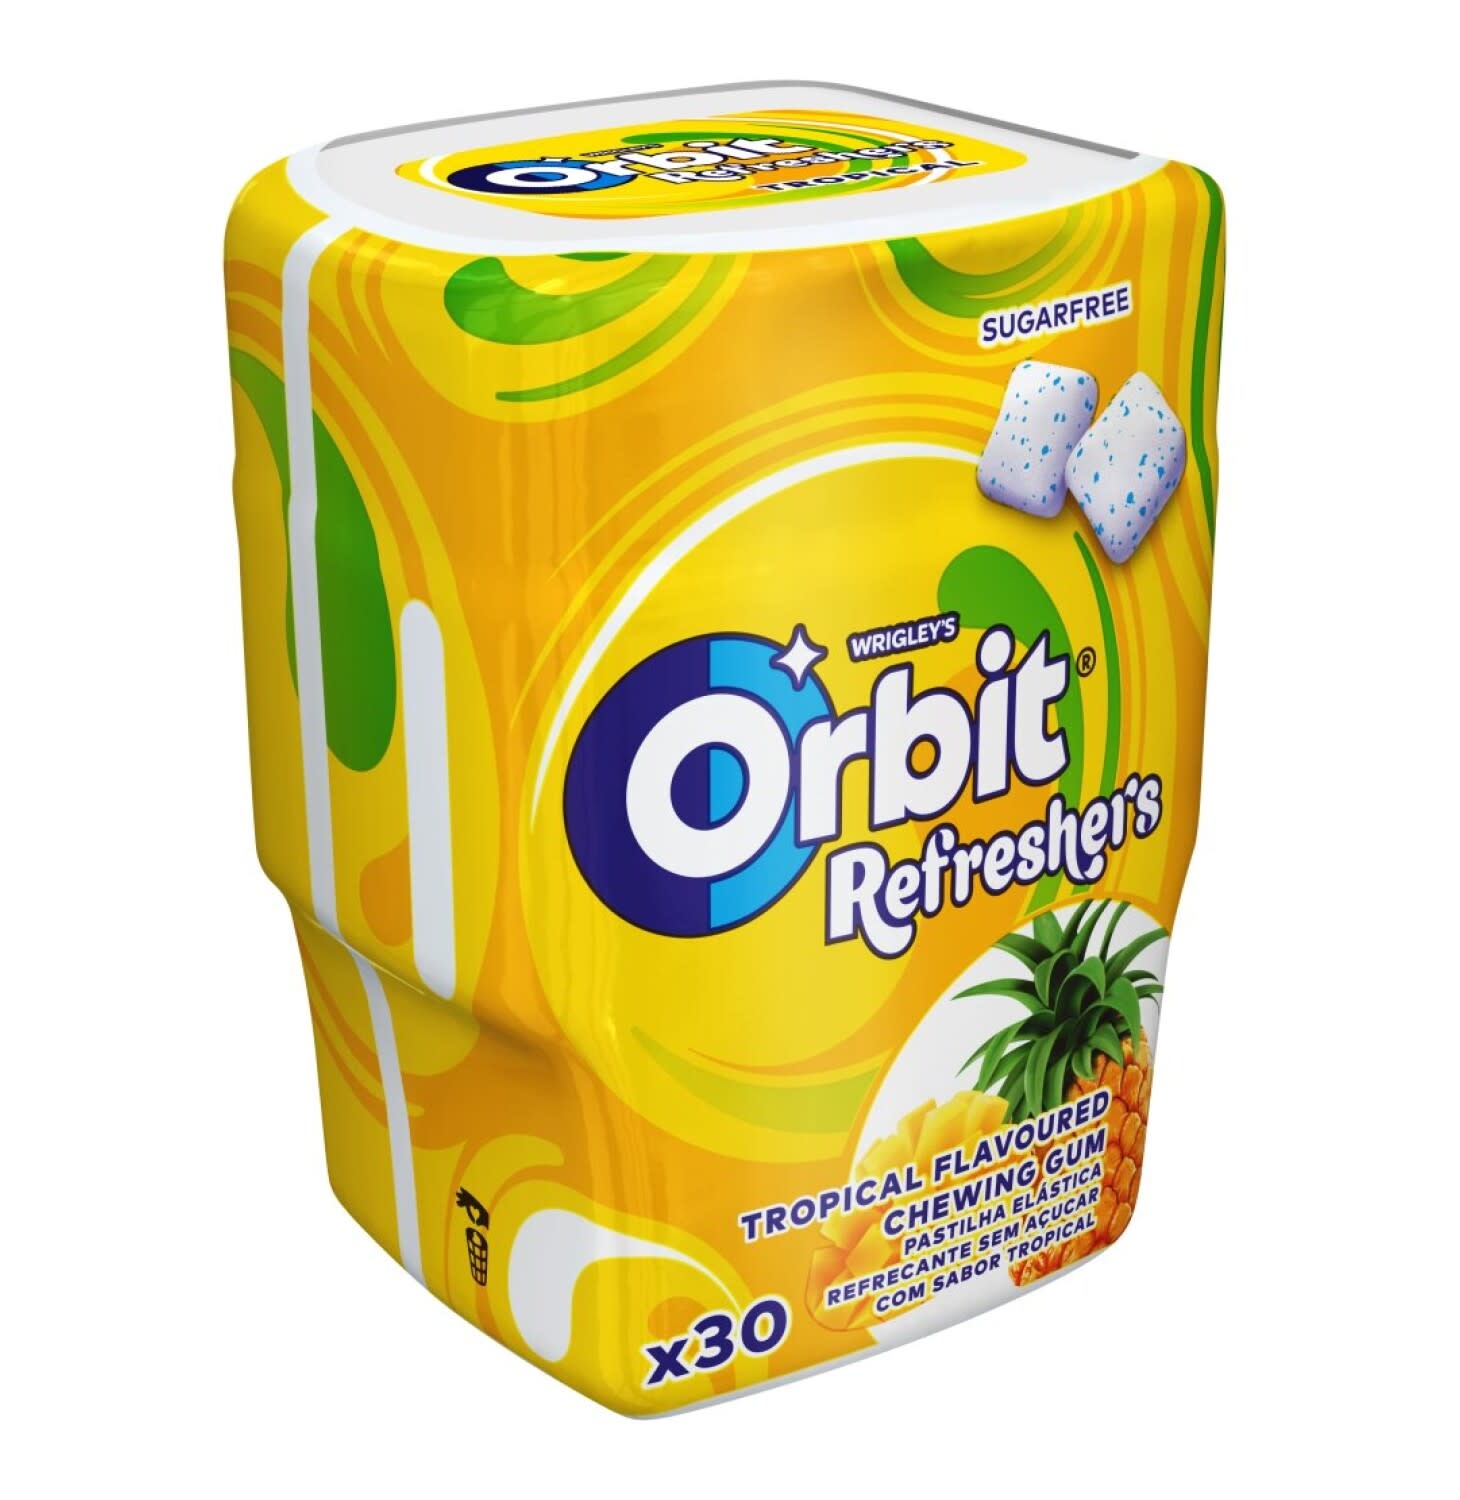 Freedent Freedent refreshers chewing gum goût tropical 